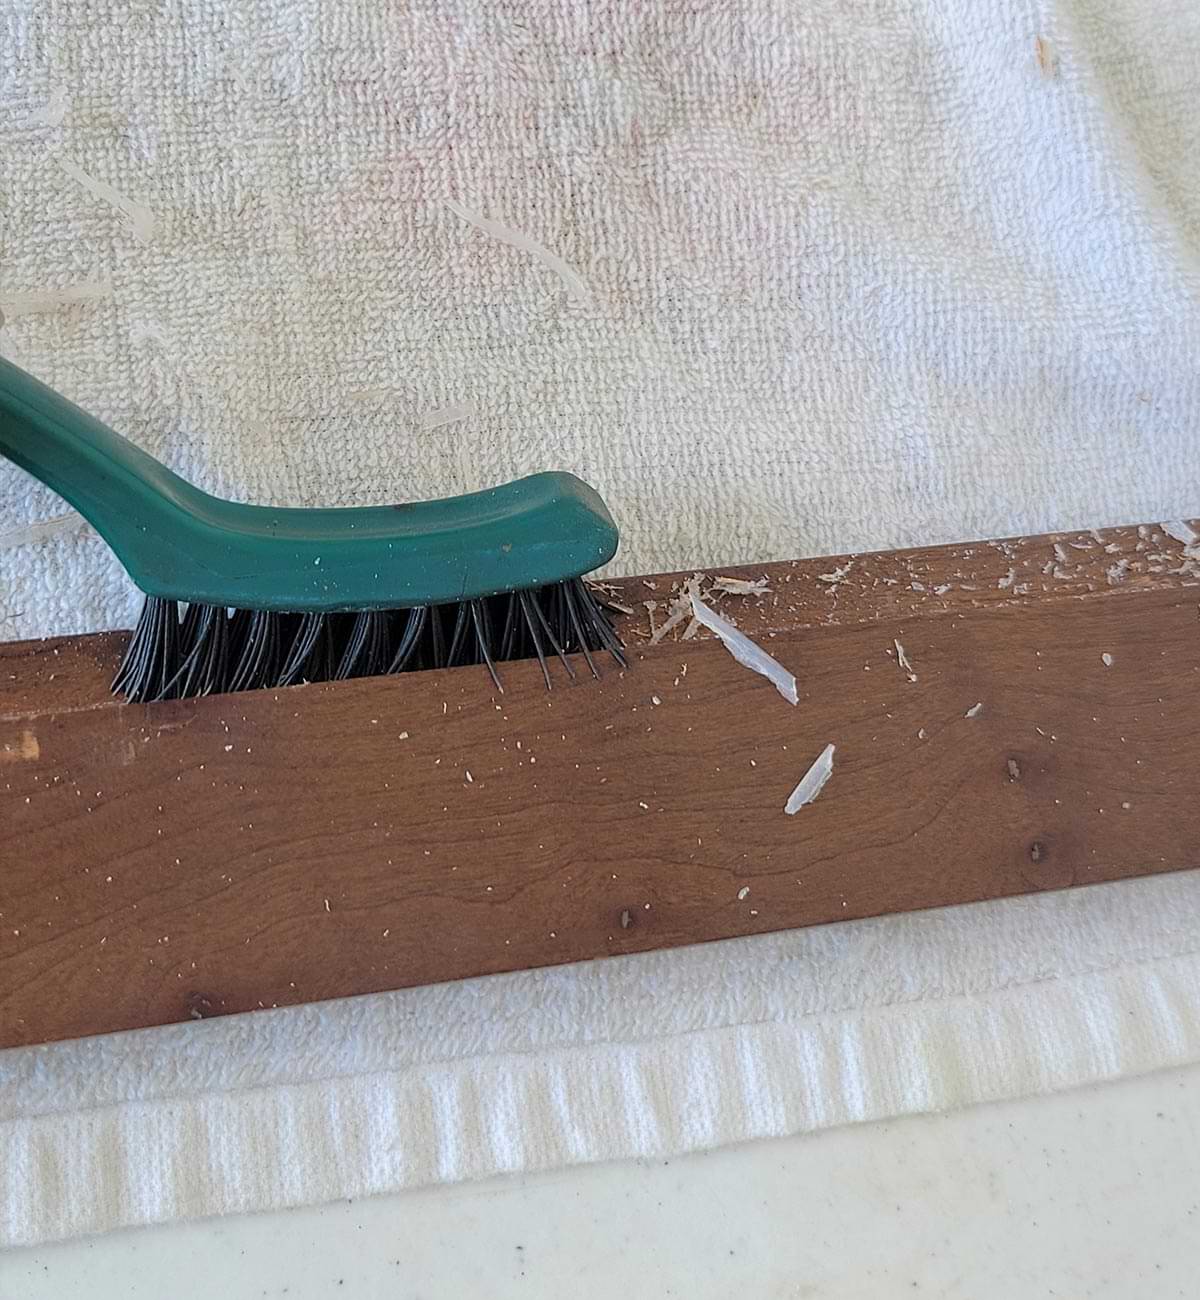 a stiff-bristle brush is used to clean the remaining silicone sealant and any glass chards that were sticking to the frame